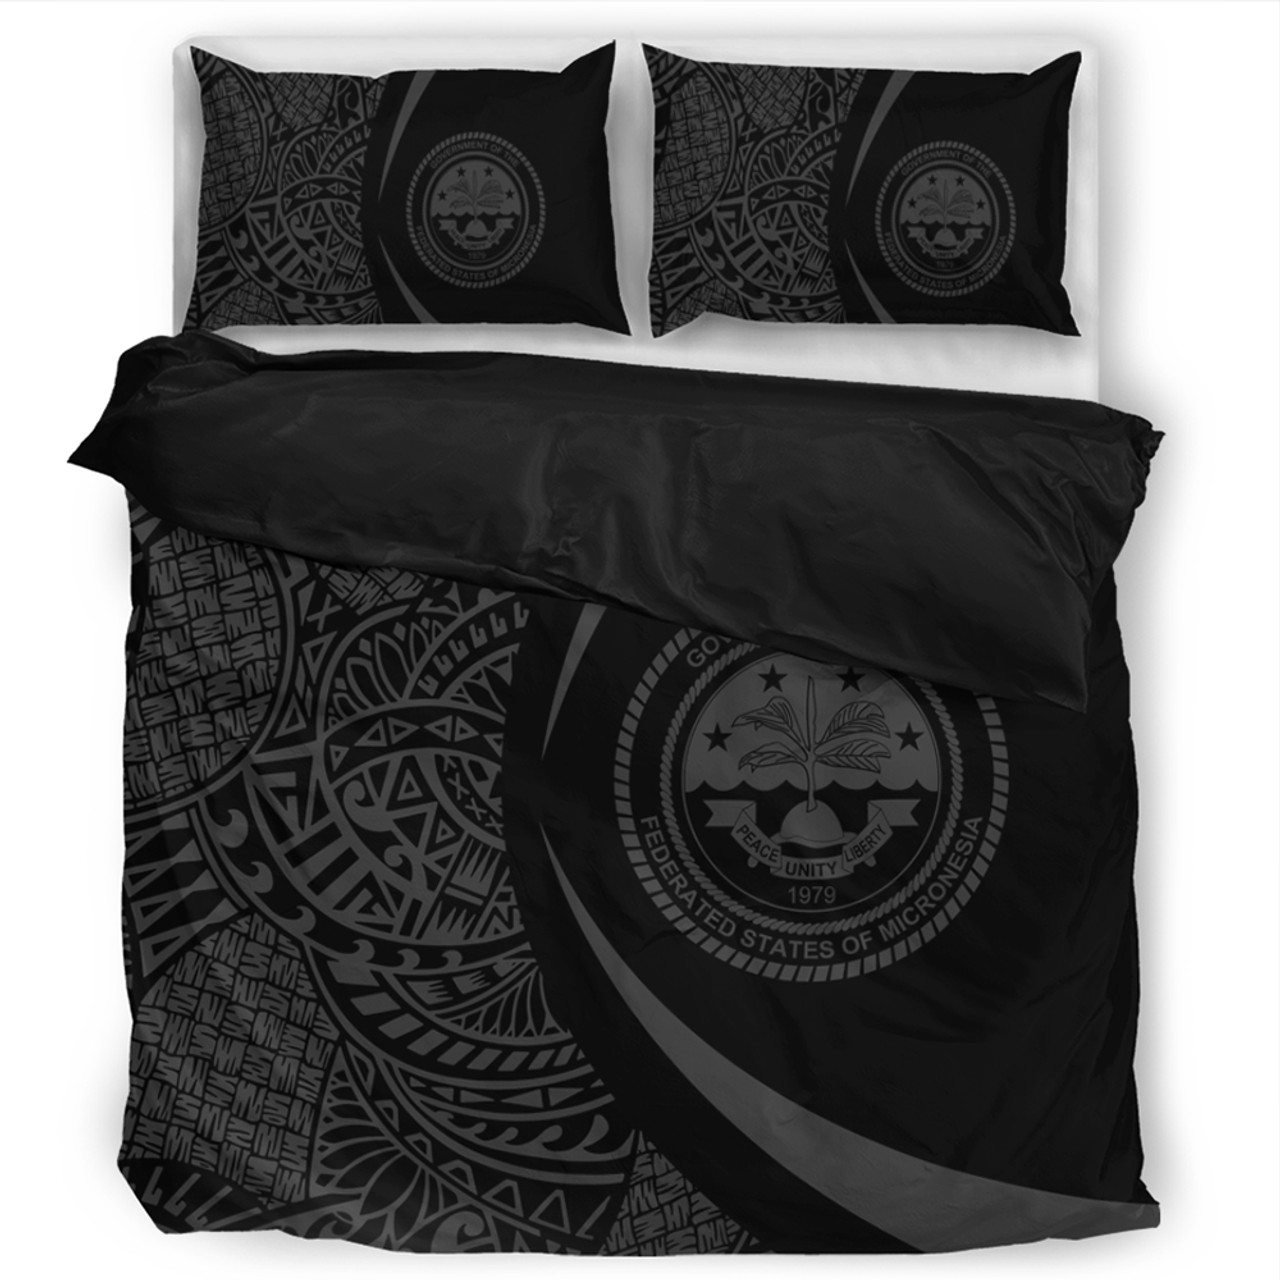 Federated States Of Micronesia Bedding Set Lauhala Gray Circle Style